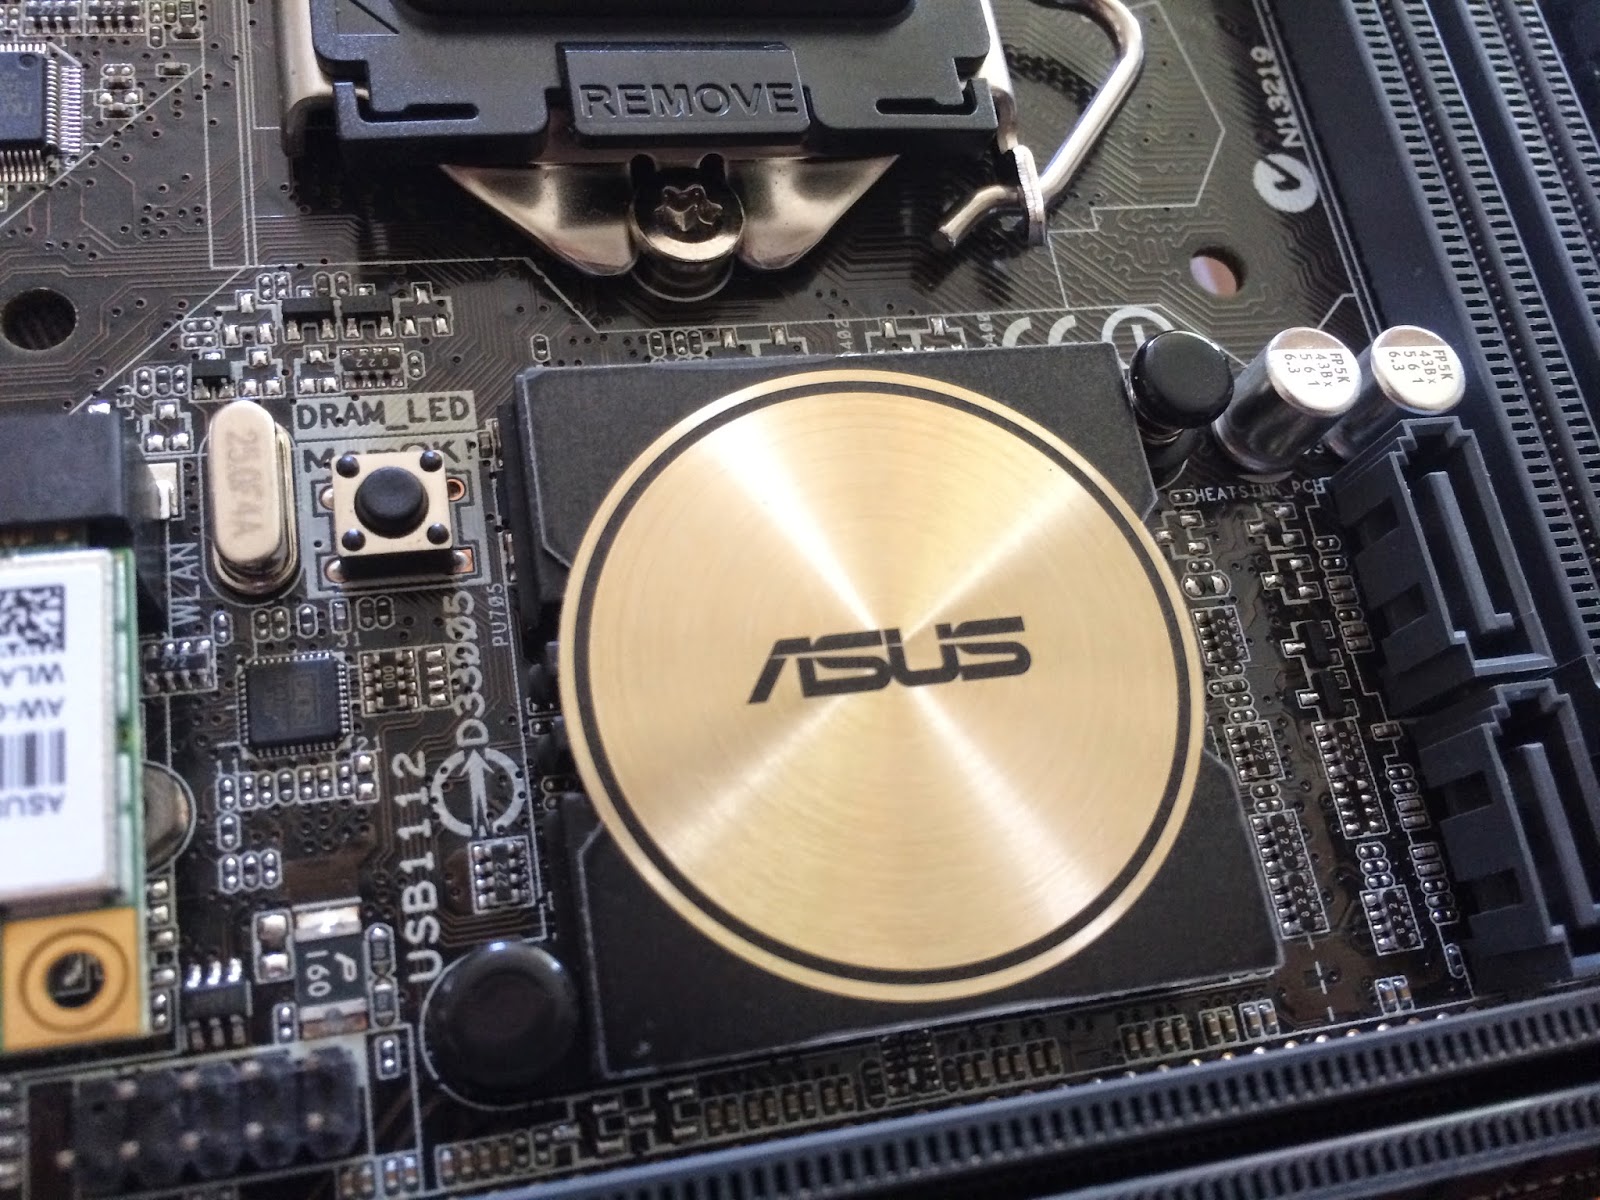 Unboxing & Review - ASUS Z97I-PLUS 20